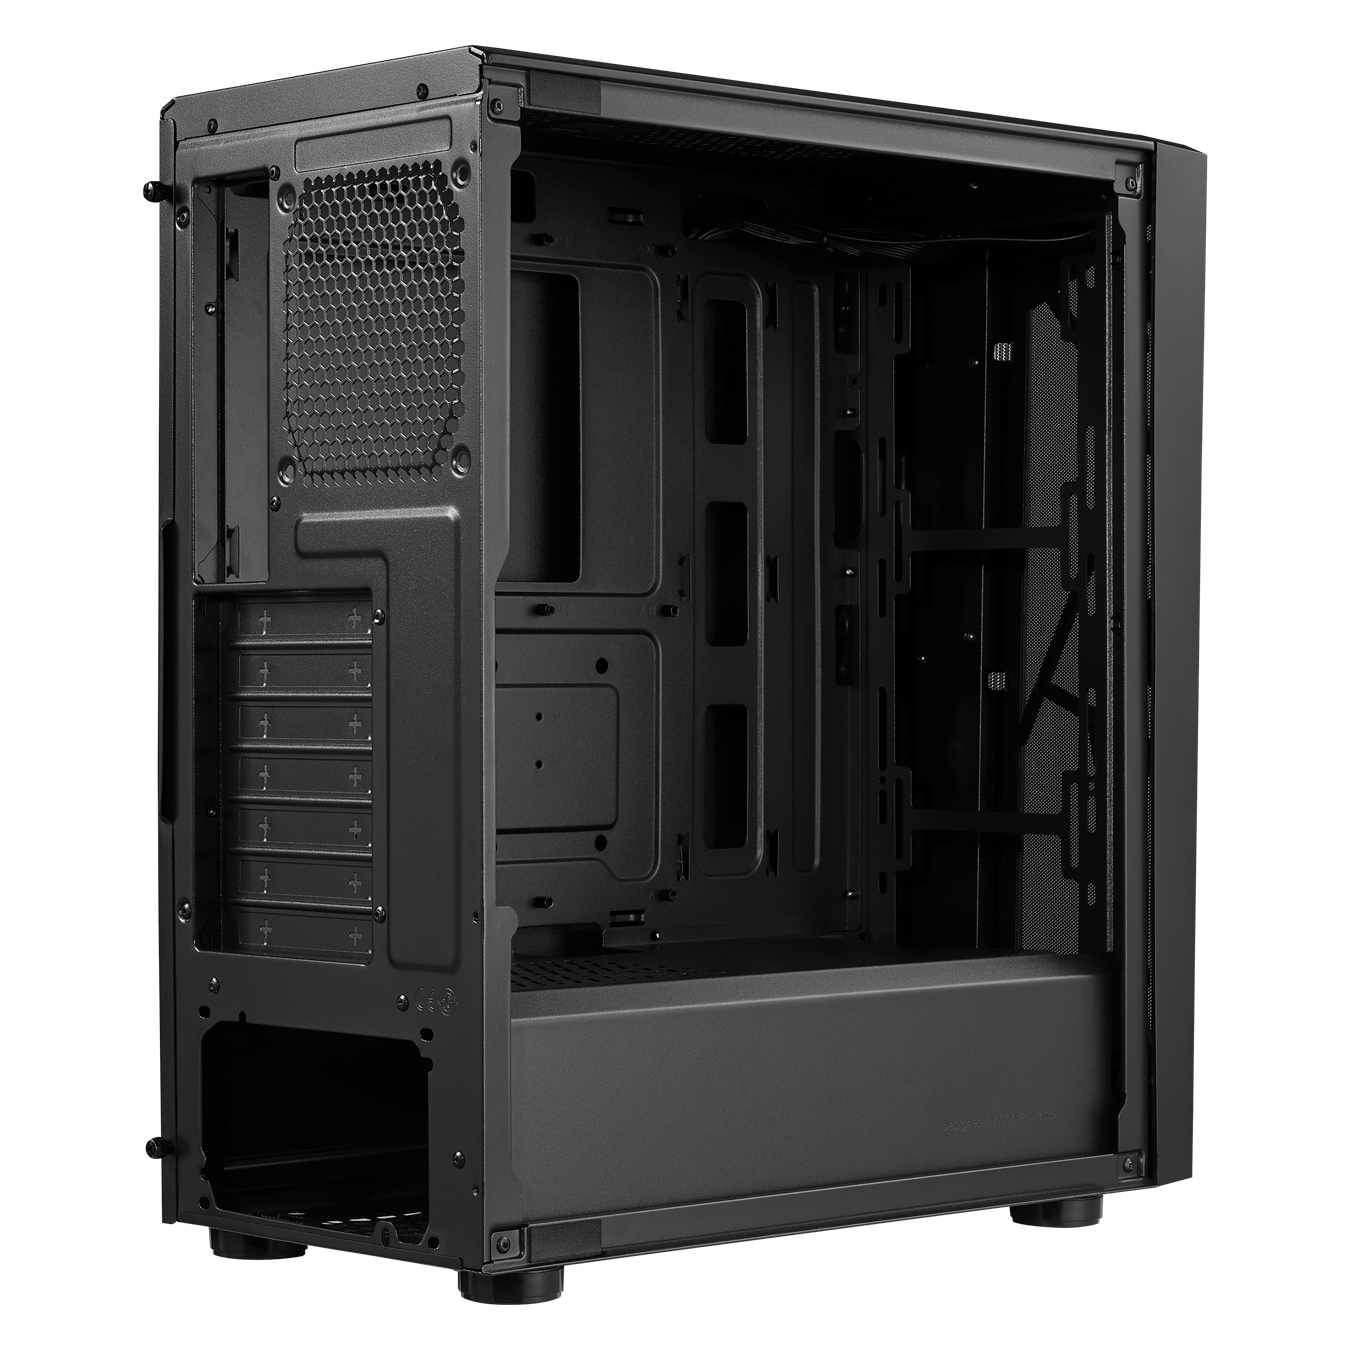 CMP 510 Mid Tower PC Case - the PSU cover is ventilated on top of the power supply location